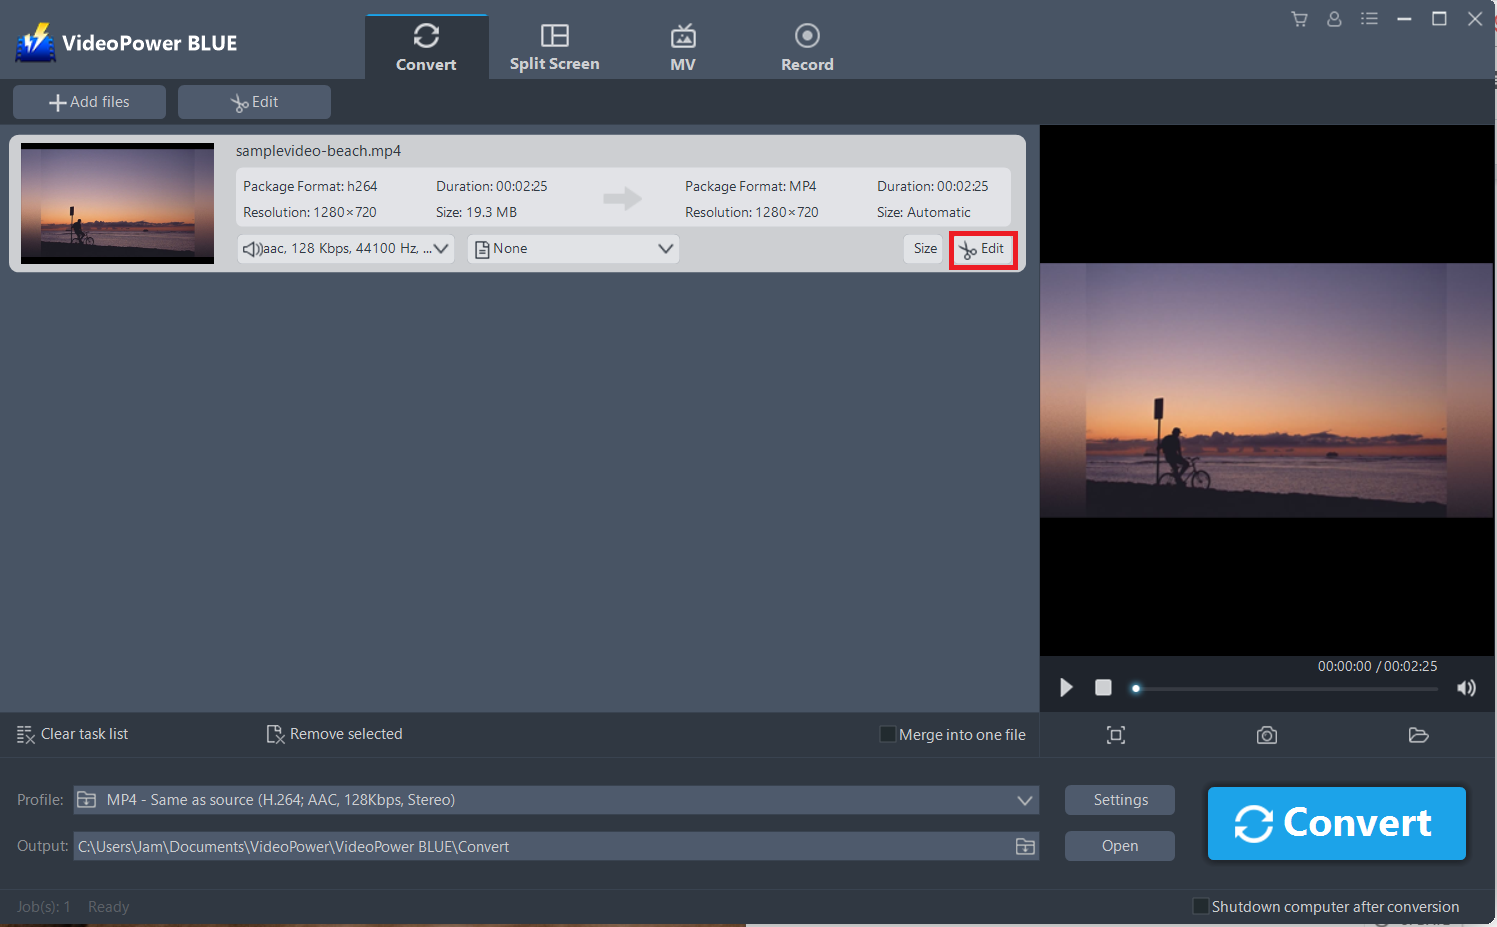 how to crop video for snapchat, VideoPower BLUE video editor program, edit